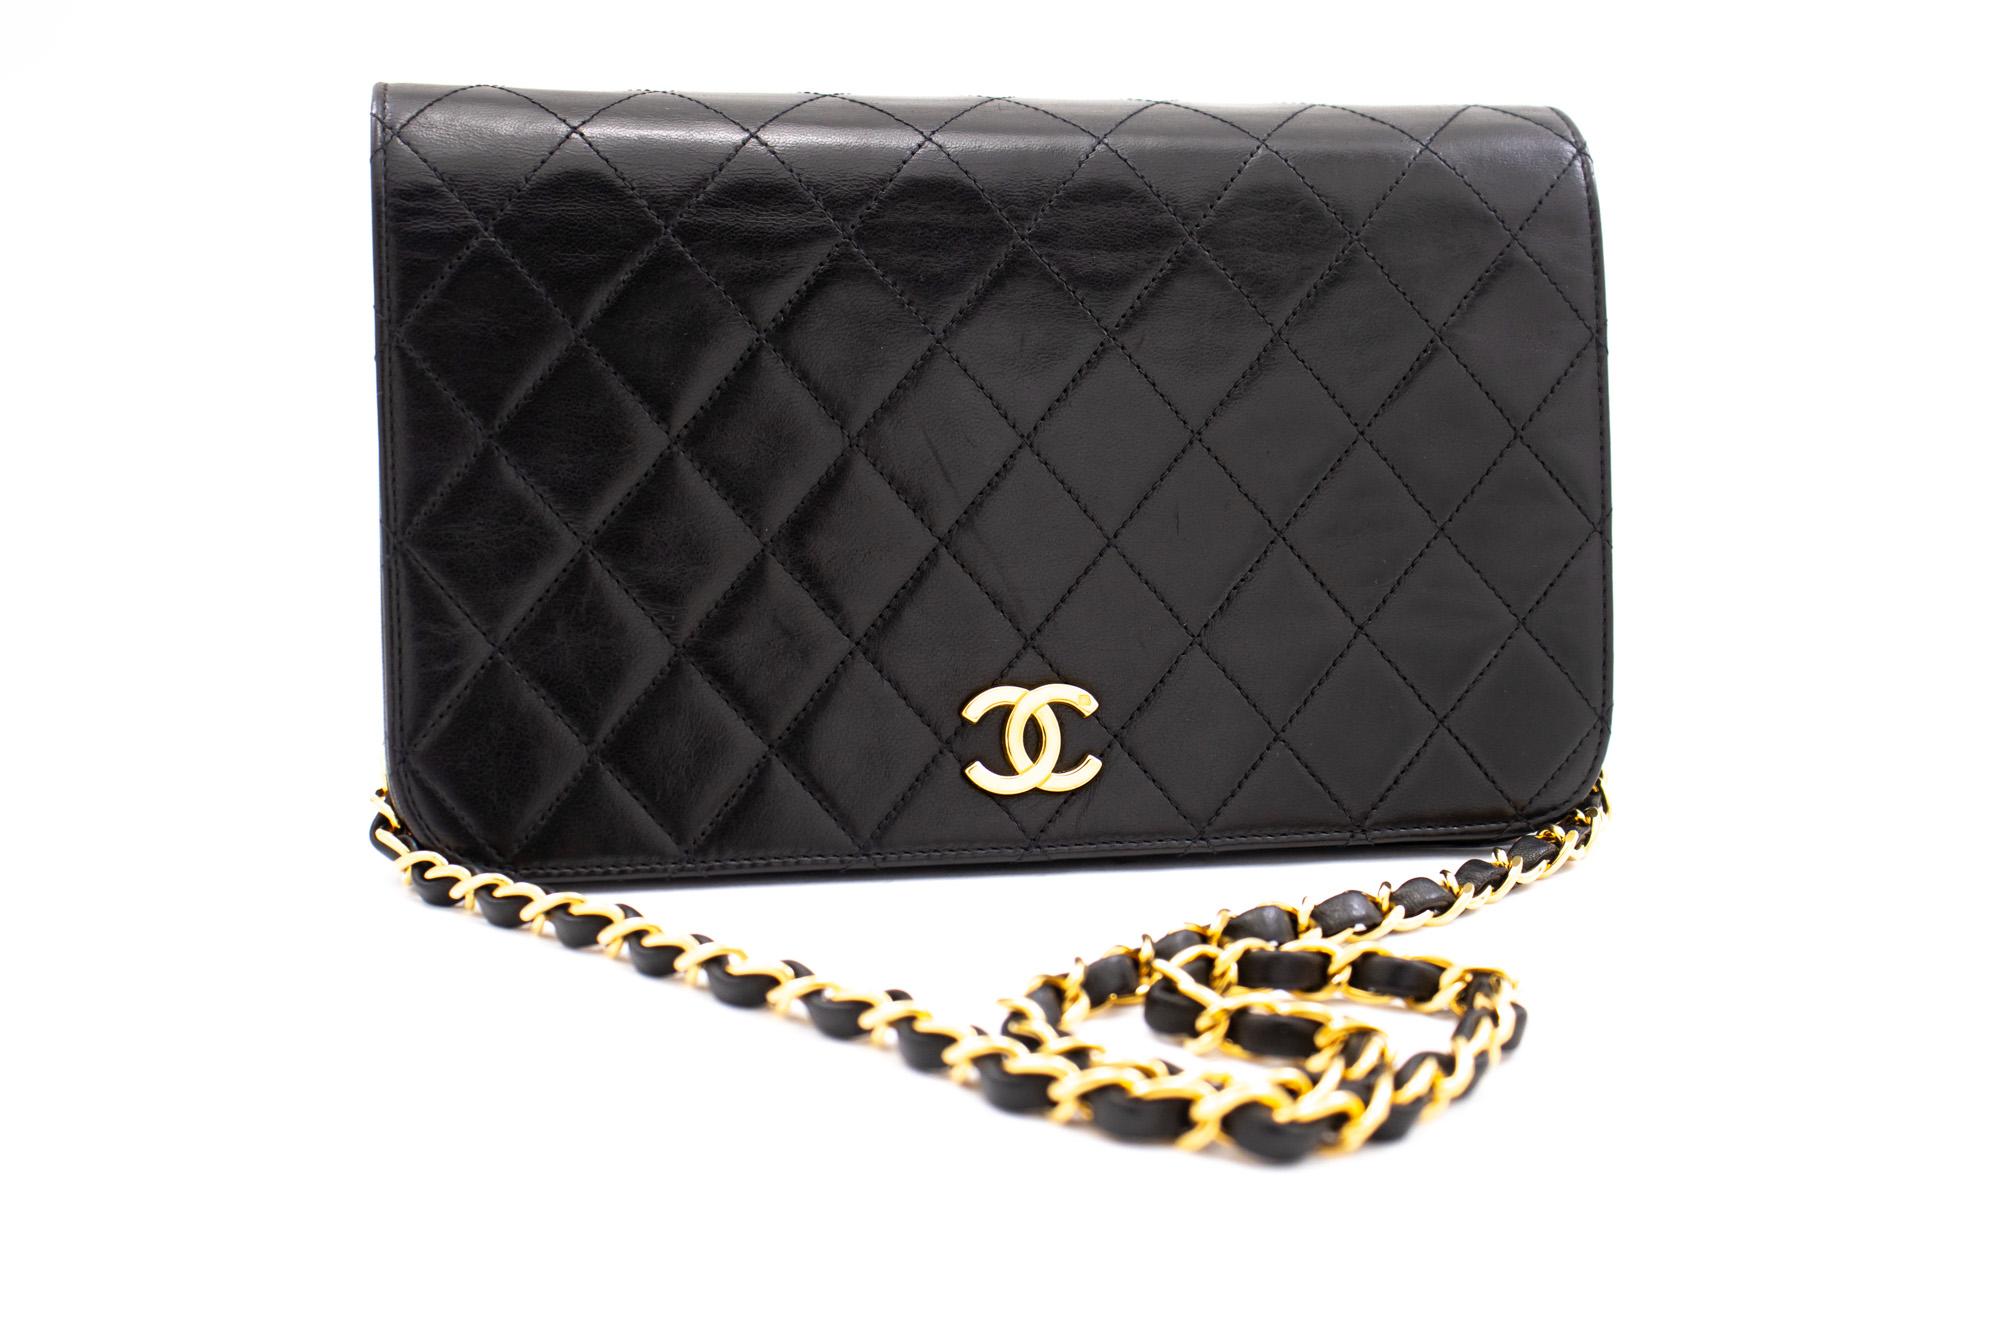 An authentic CHANEL Full Flap Chain Shoulder Bag Clutch Black Quilted made of black Lambskin. The color is Black. The outside material is Leather. The pattern is Solid. This item is Vintage / Classic. The year of manufacture would be